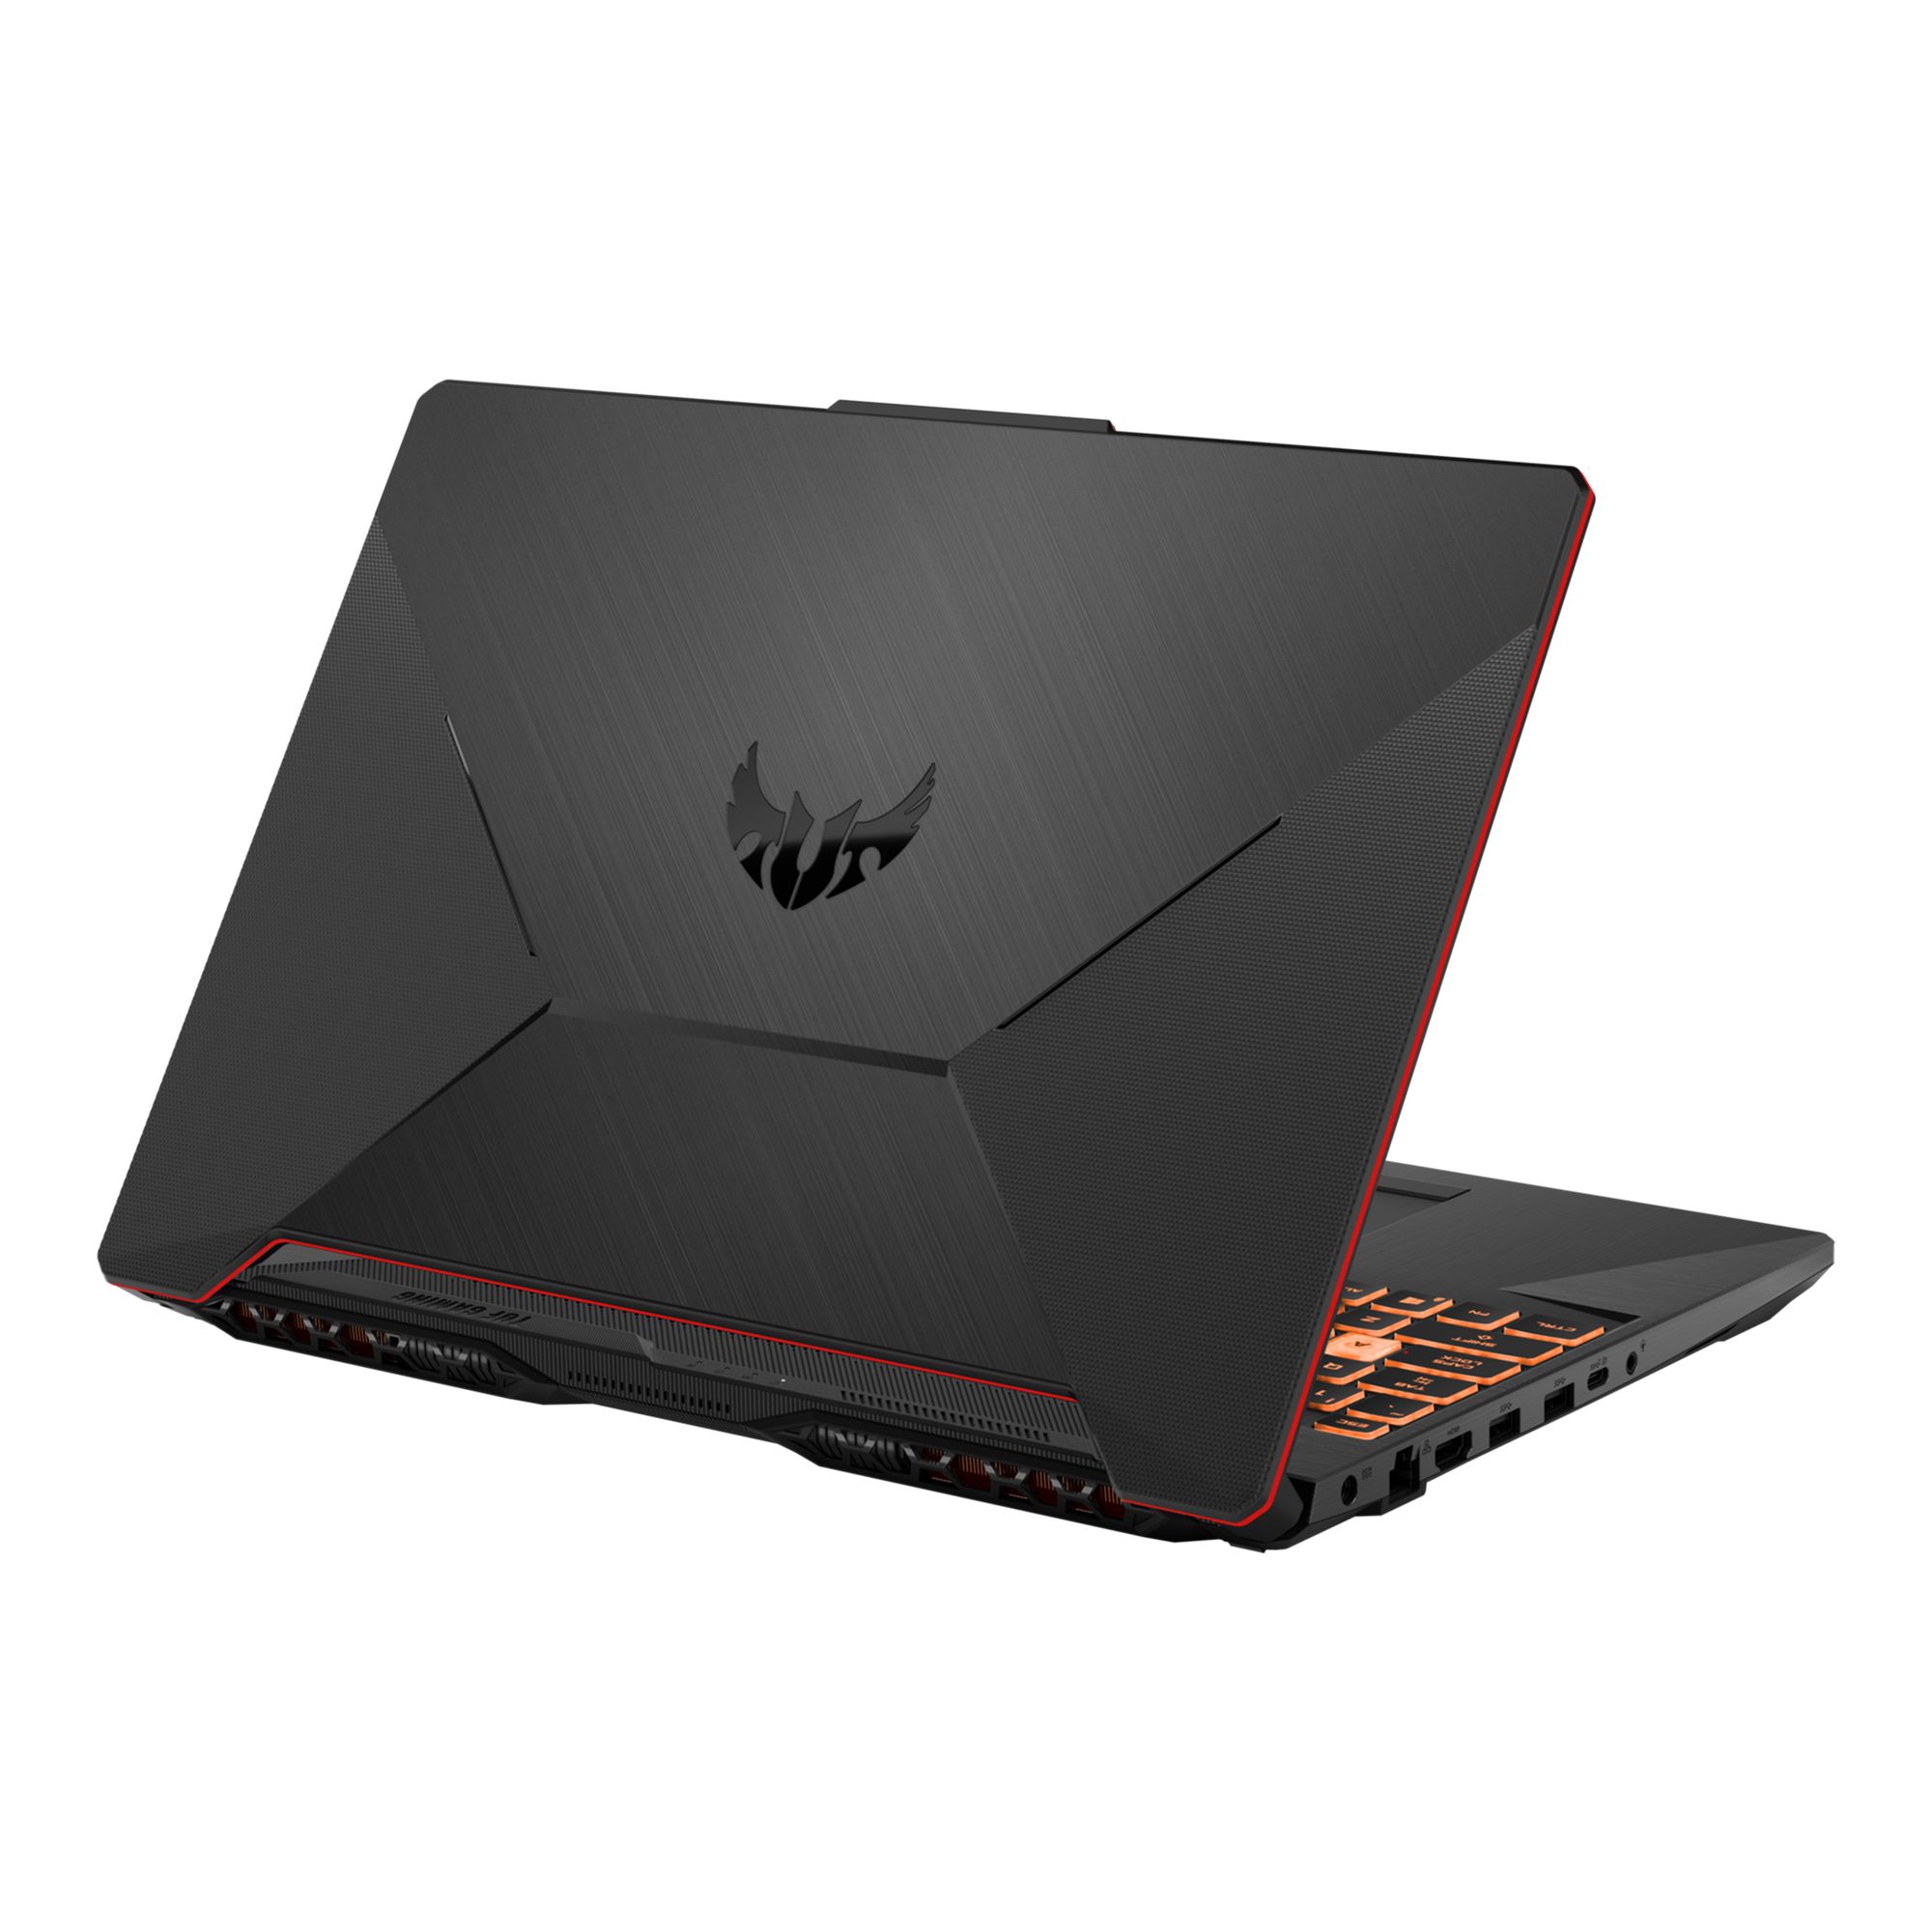 Laptop Gaming ASUS ROG TUF A15, FX507ZC4-HN291, 15.6-inch, FHD (1920 x 1080) 16:9, 12th Gen Intel® Core™ i5-12500H Processor 2.5 GHz (18M Cache, up to 4.5 GHz, 12 cores: 4 P-cores and 8 E-cores), NVIDIA® GeForce RTX™ 3050 Laptop GPU, 144Hz, DDR4 16GB, 512GB PCIe® 3.0 NVMe™ M.2 SSD, 250nits_3